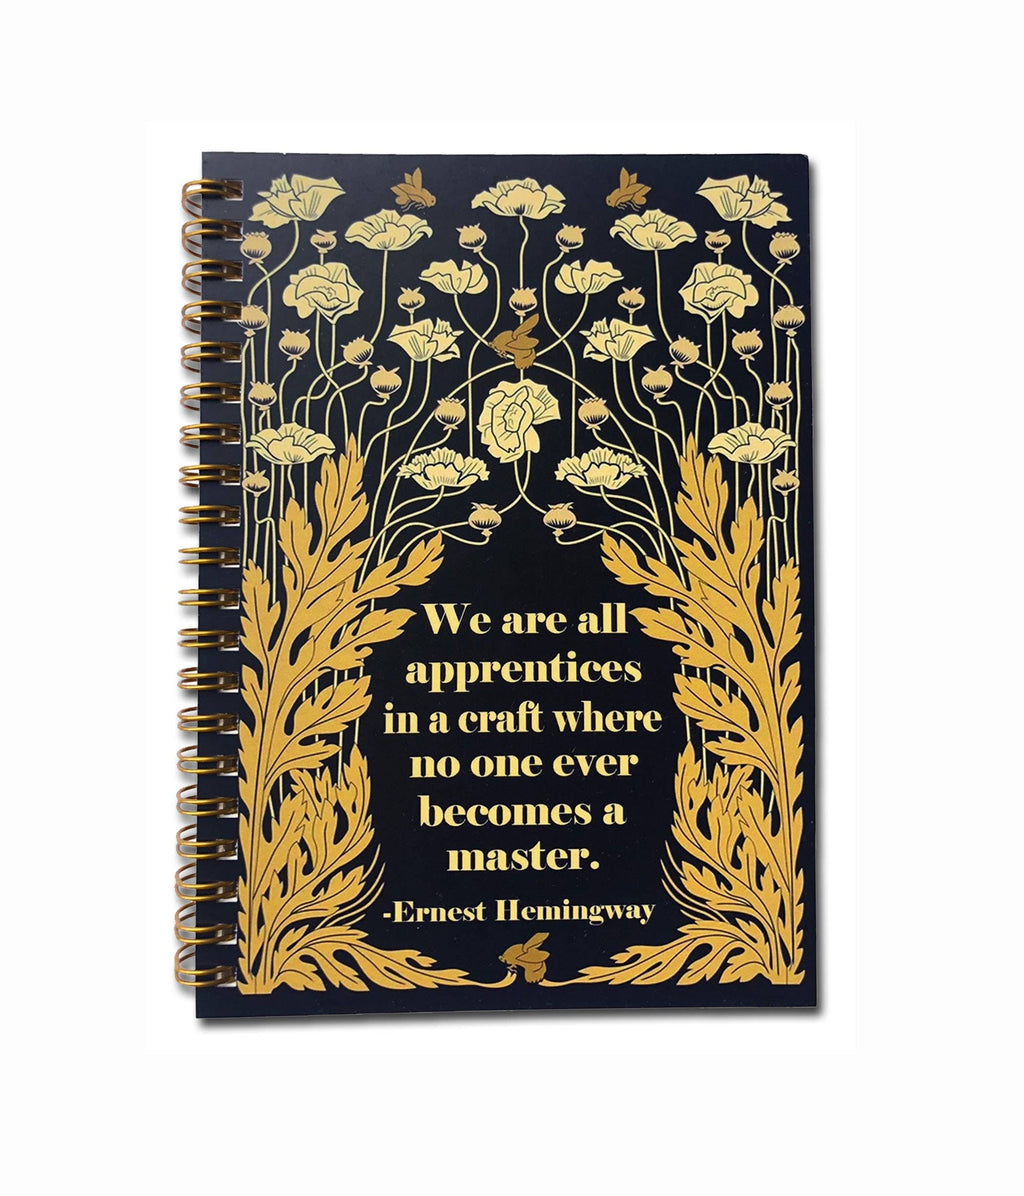 Vintage Journal for Book Lover or Book Worm.  This Notebook would make a good birthday gift for Grammar Nut. Birthday Idea. Proper Grammar. English Language Gift. Perfect gift for a reader or teacher.